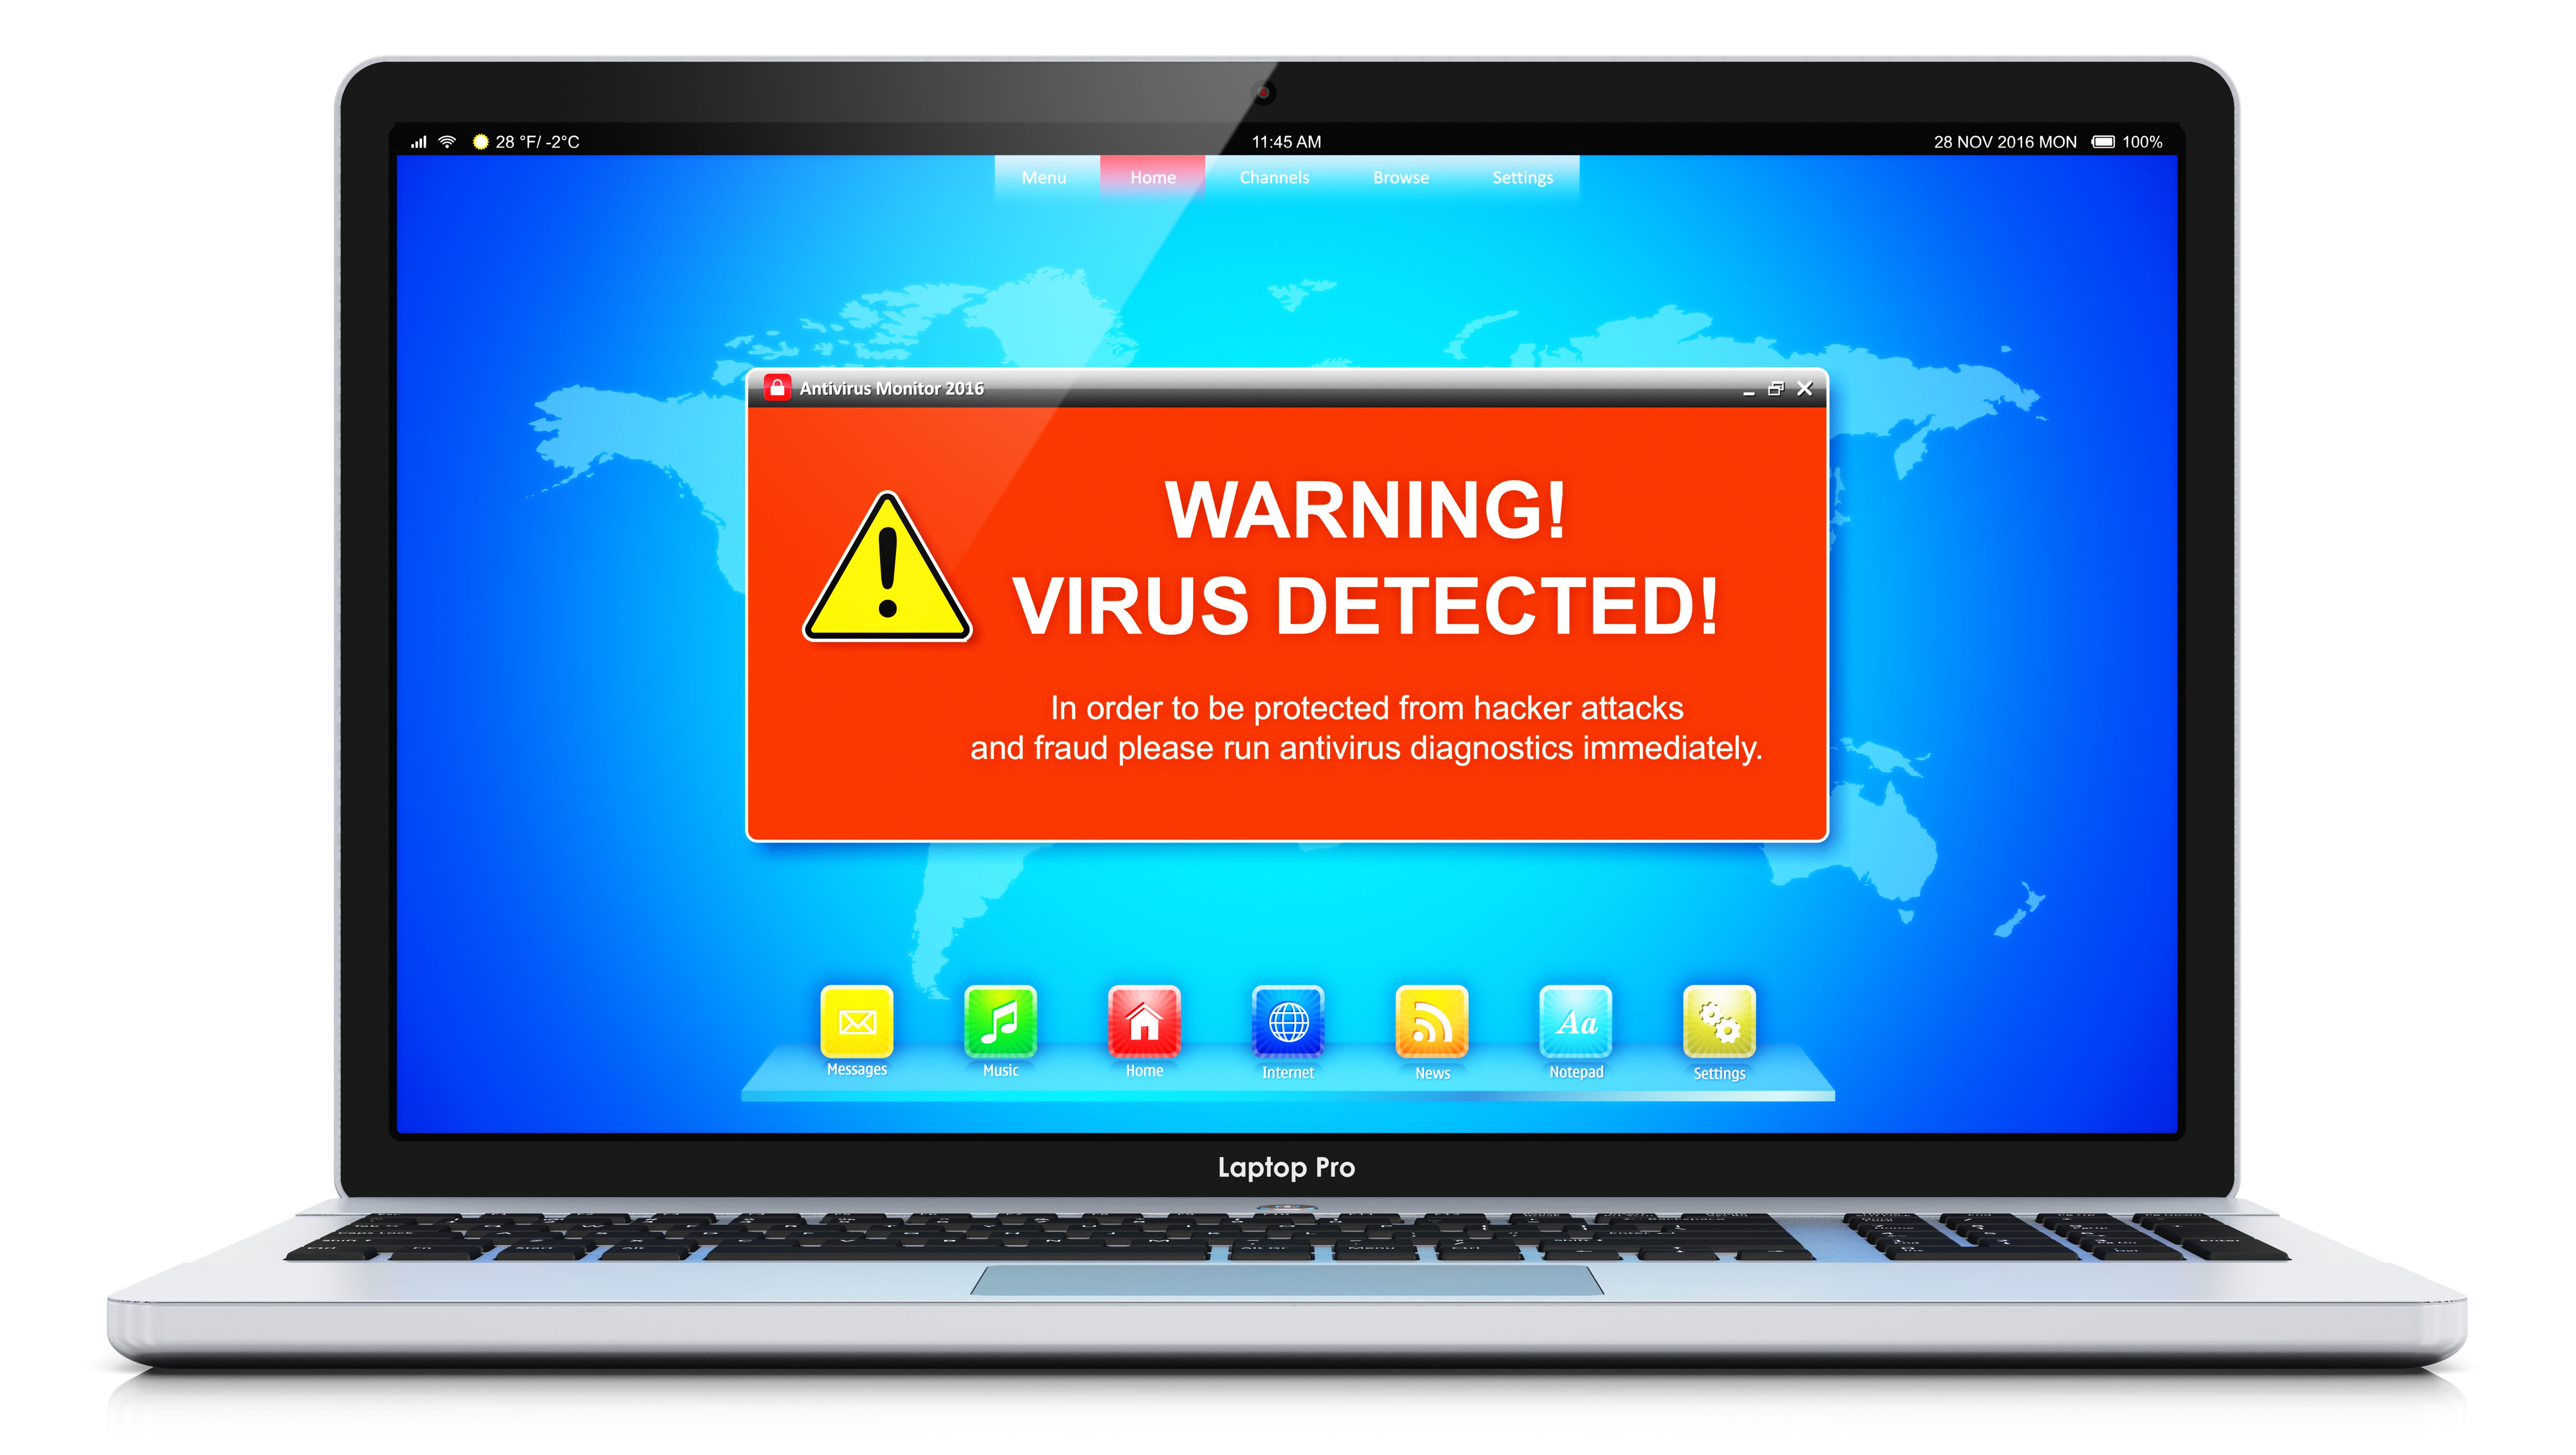 Ashley Furman Uddybe knap Computer help: How do I get rid of a pop-up warning about viruses?